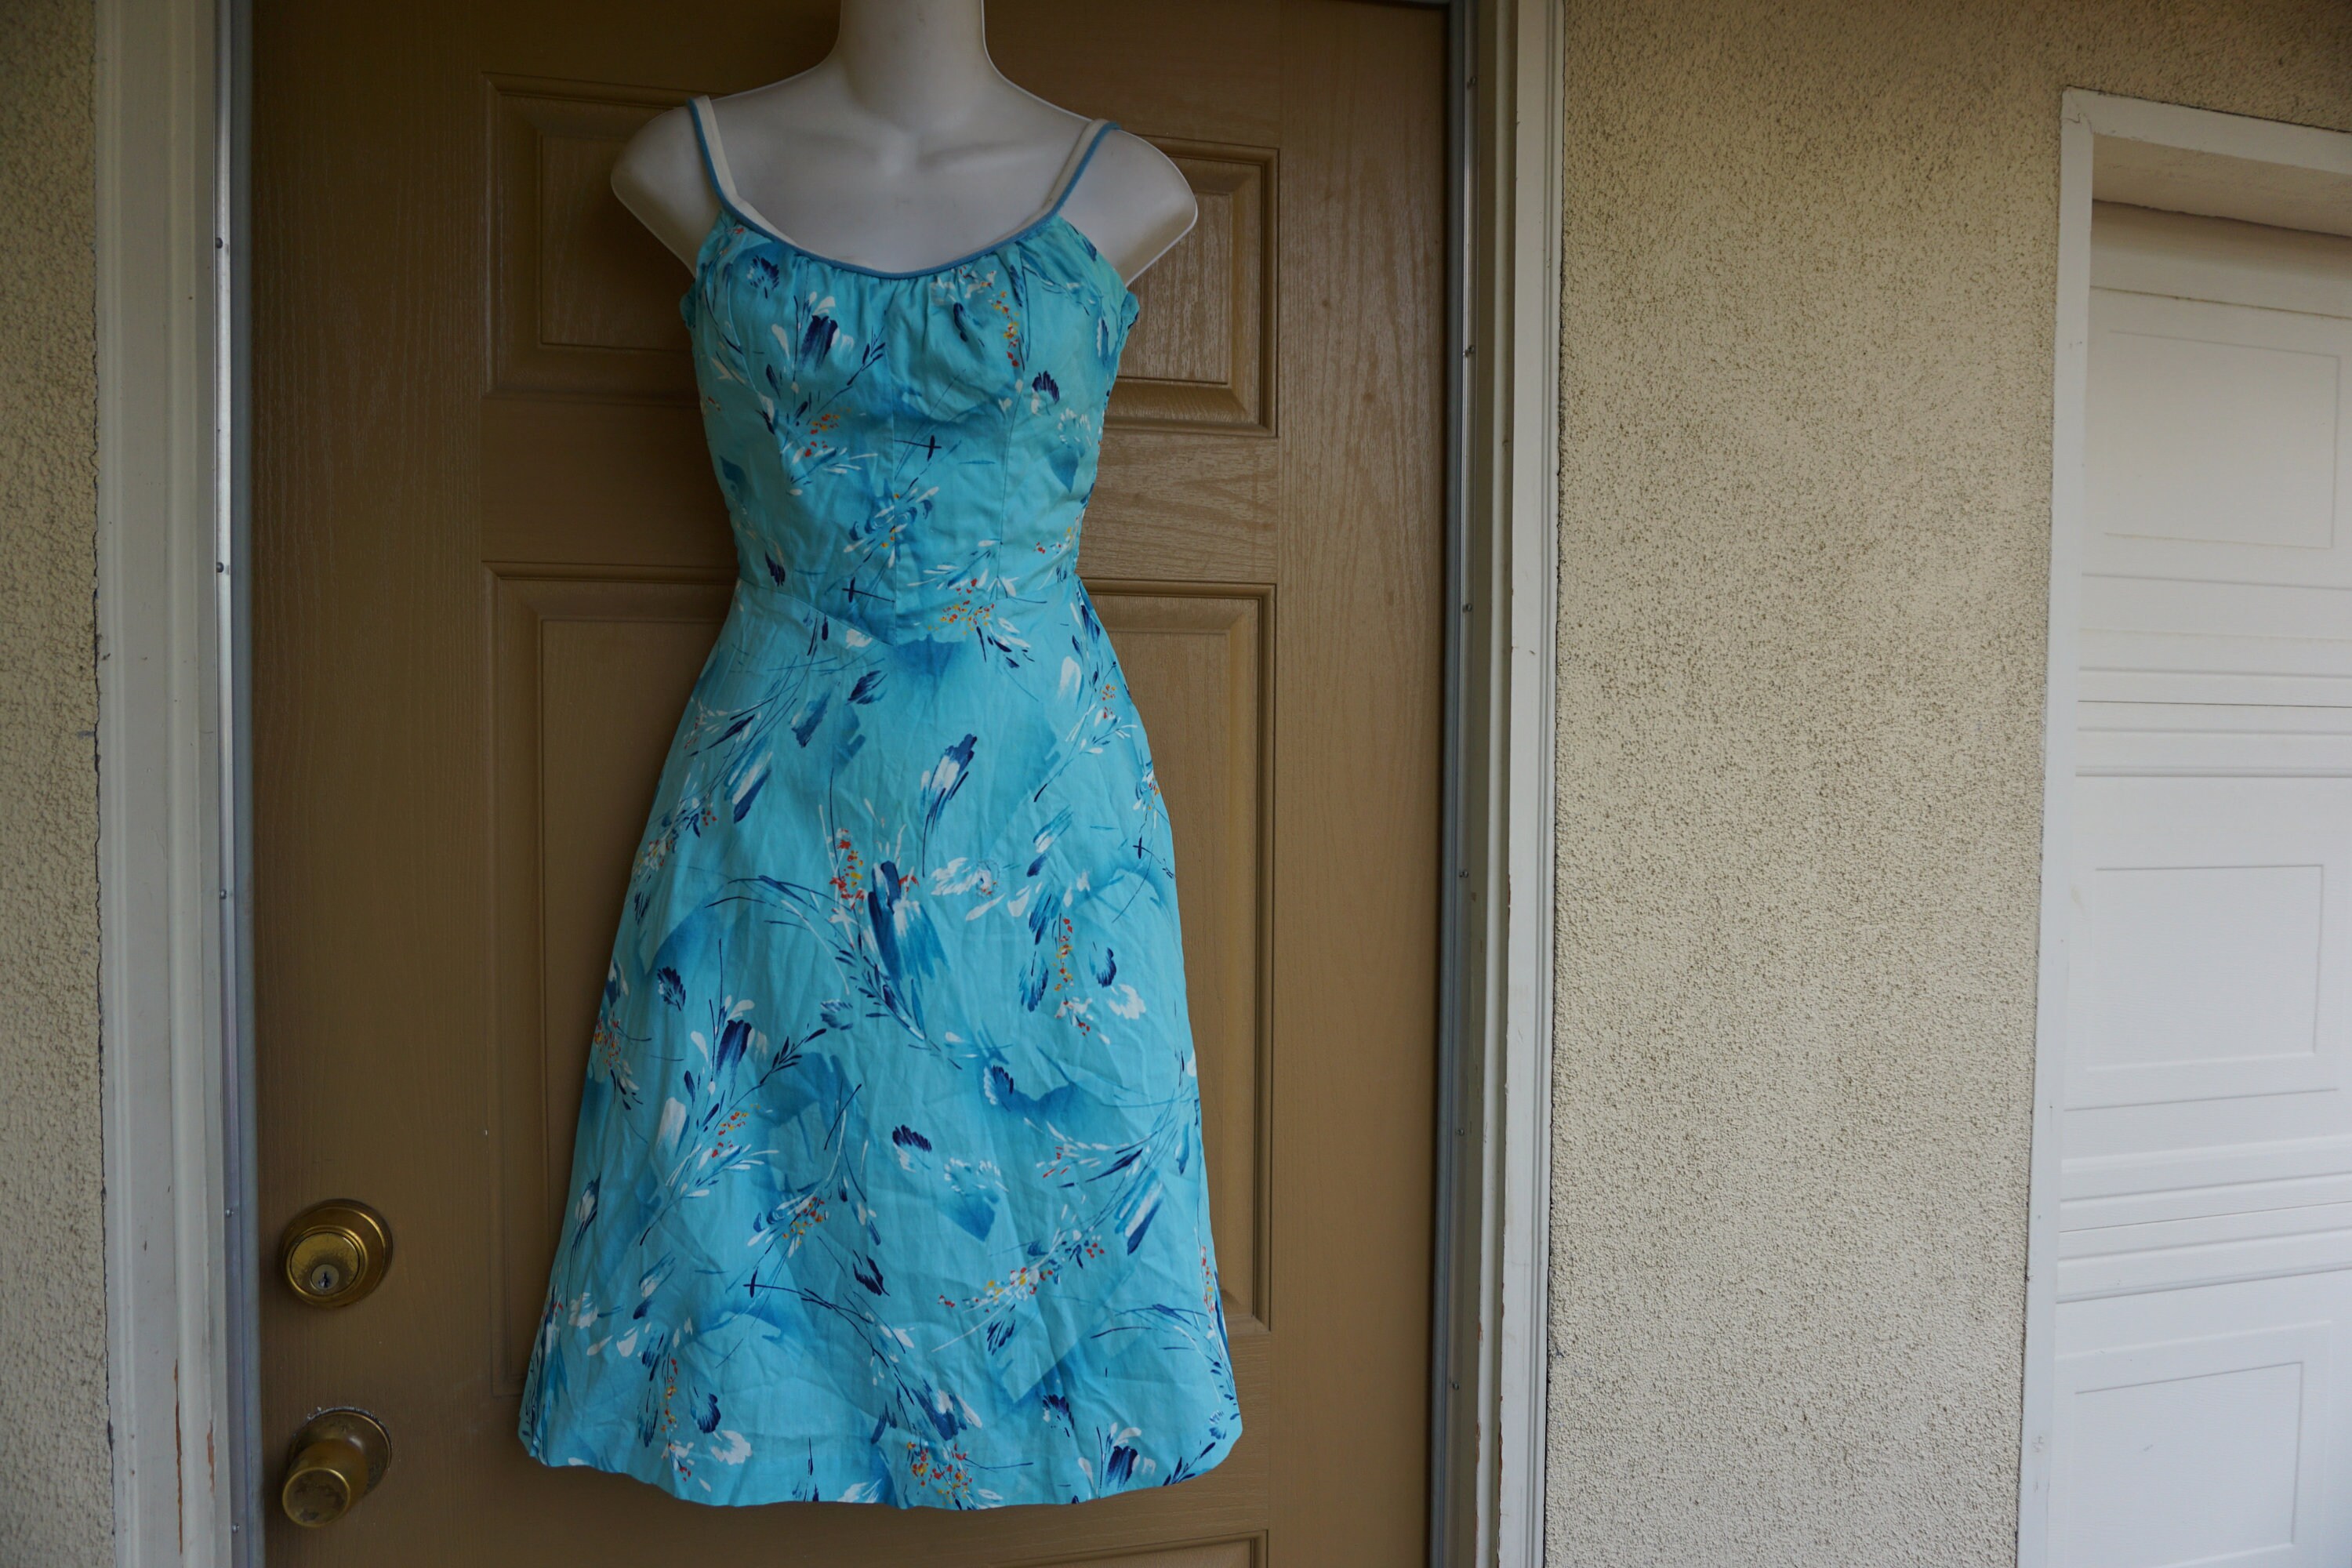 Vintage By Dash About, Blue Floral Sun Dress With Built In Bra No size tag